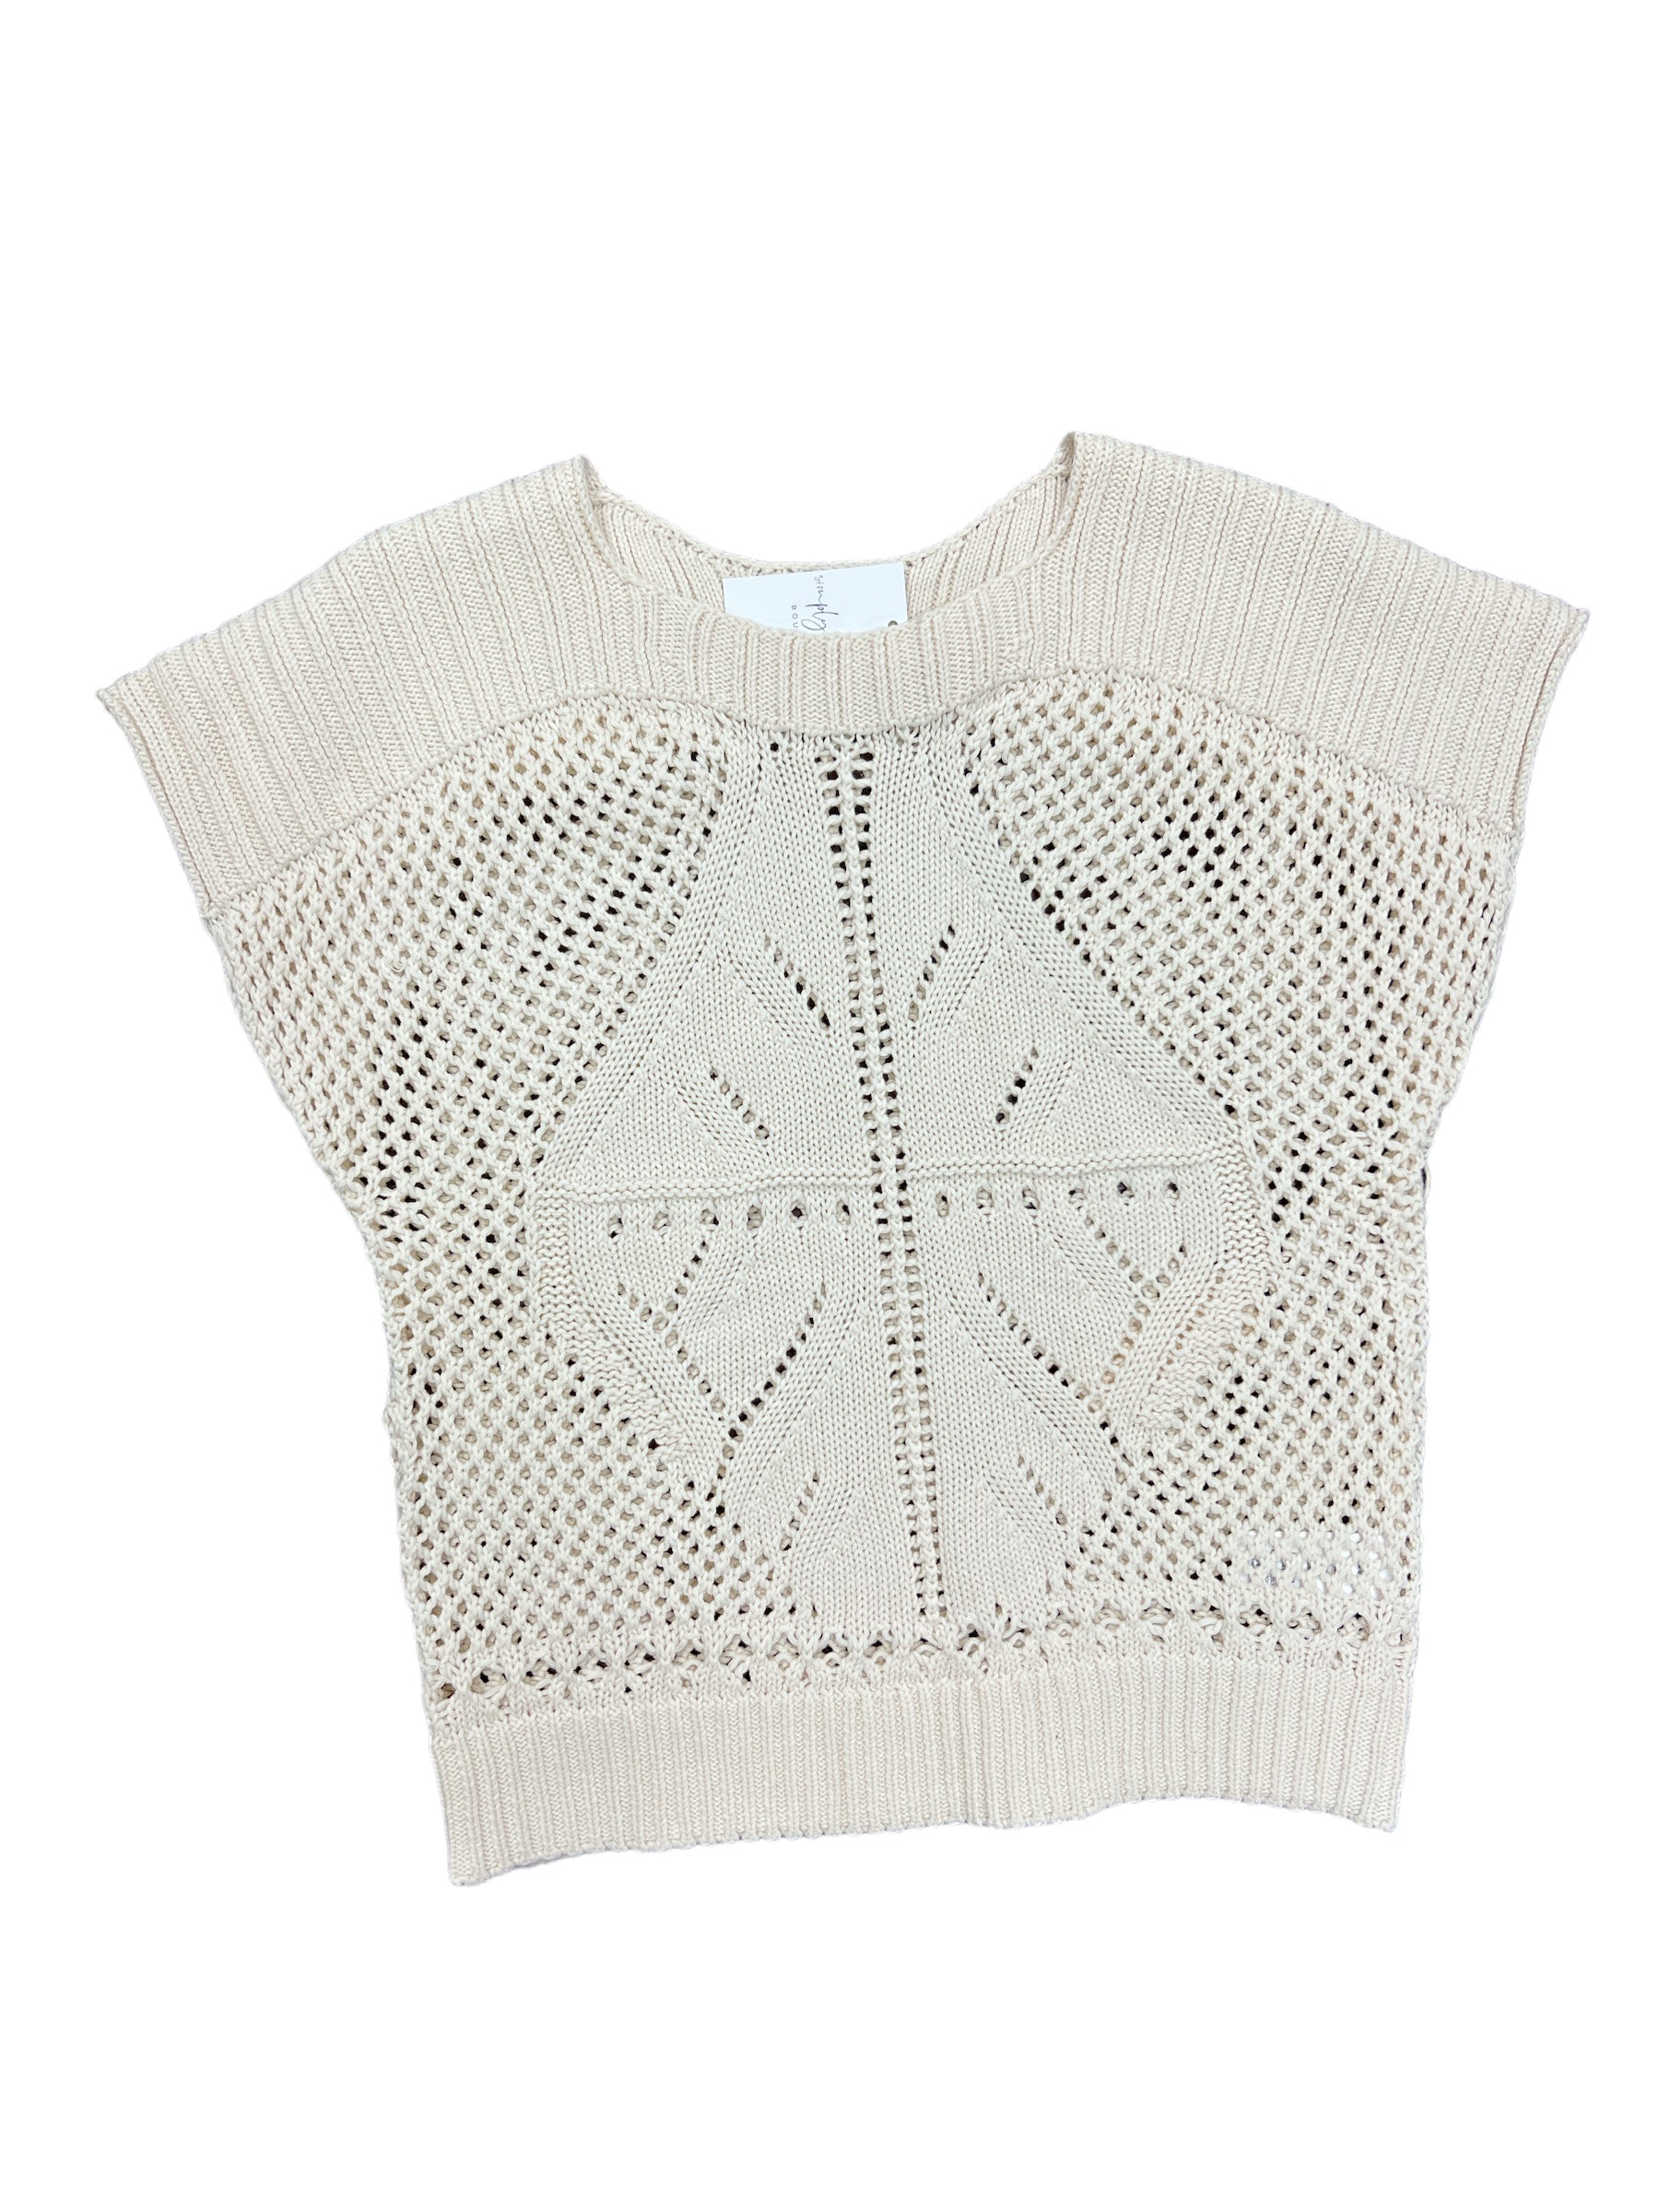 Nelly Sweater Vest-120 Casual Tops & Tees-Simply Stylish Boutique-Simply Stylish Boutique | Women’s & Kid’s Fashion | Paducah, KY